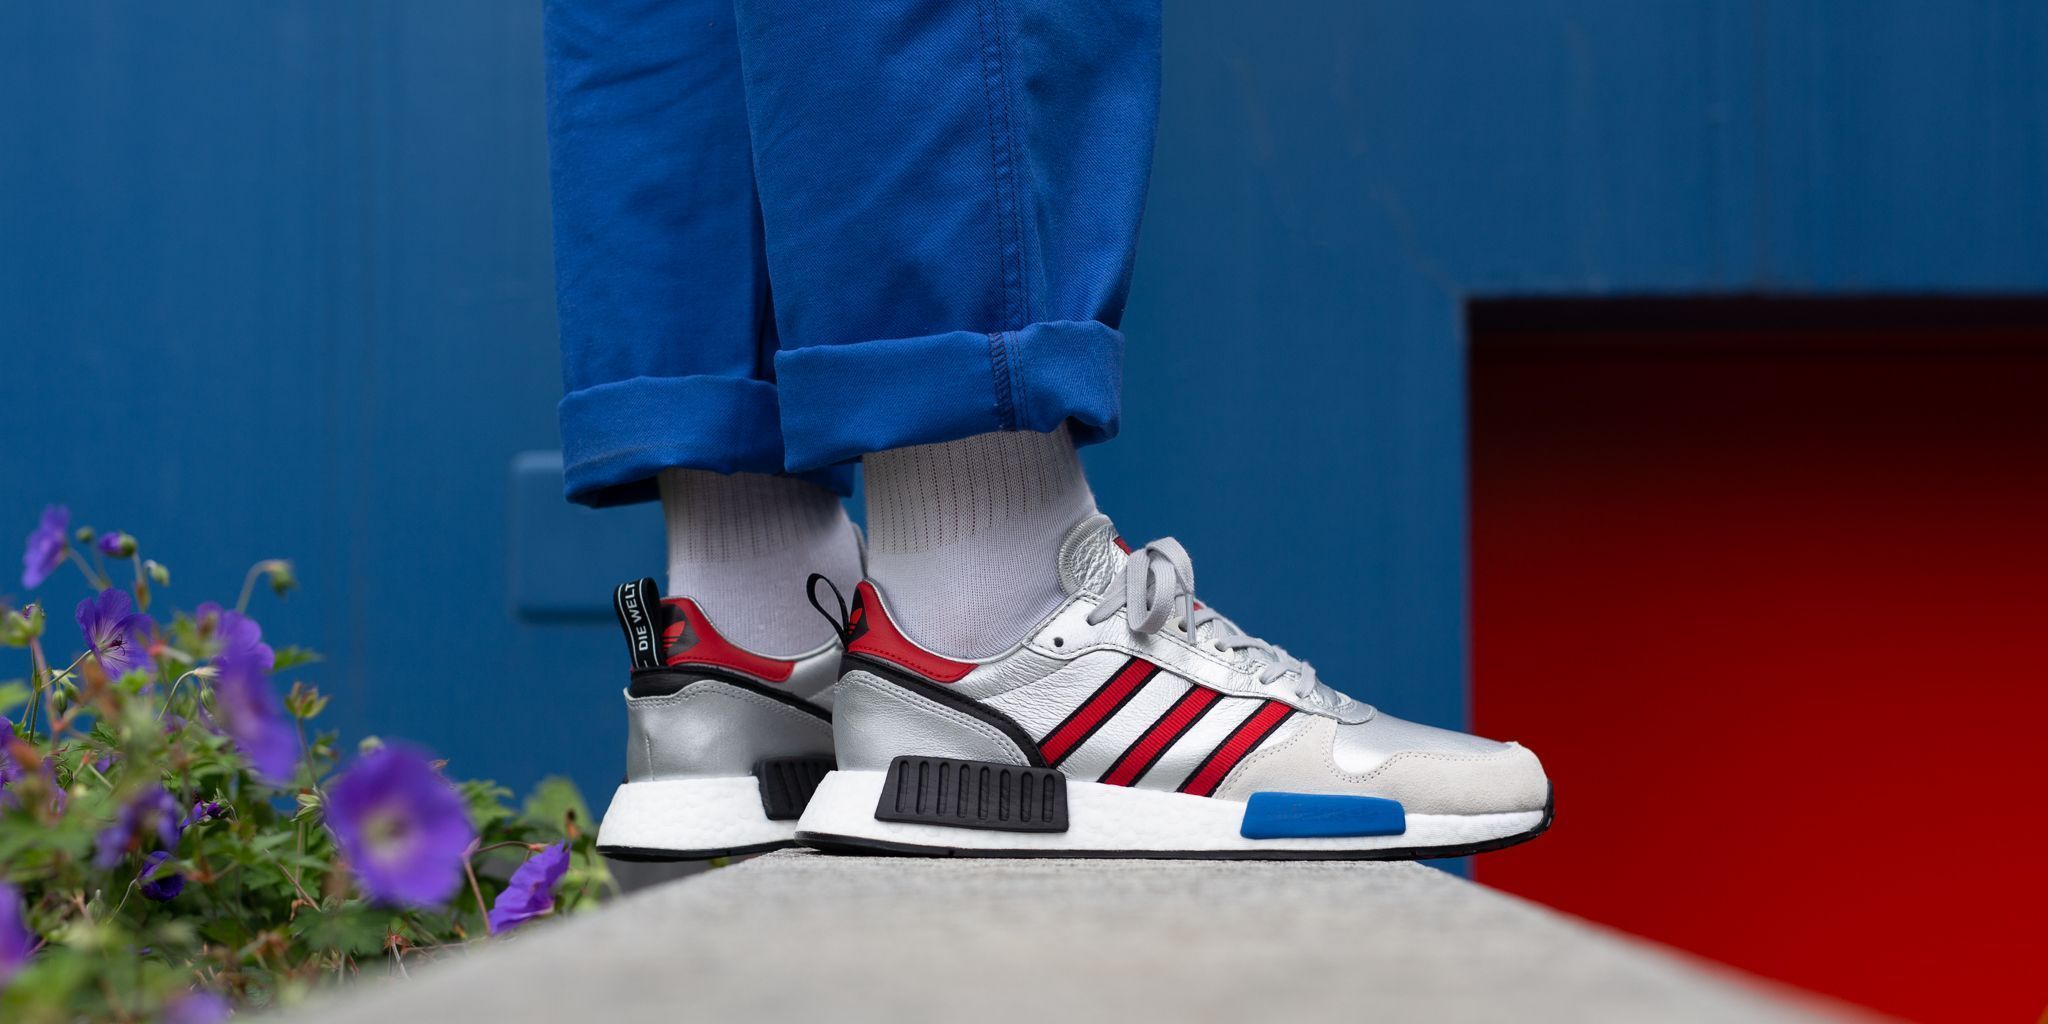 manual Disponible neumático Titolo ar Twitter: "out 🔥 now ❗️ Adidas Rising Star x R1 "Never Made Pack"  - Silver Metallic/Collegiate Red/Footwear White s h o p ➡️  https://t.co/jn7JN7tBLA #adidas #adidasoriginals #nevermade #zx930 #eqt  #micropacer #